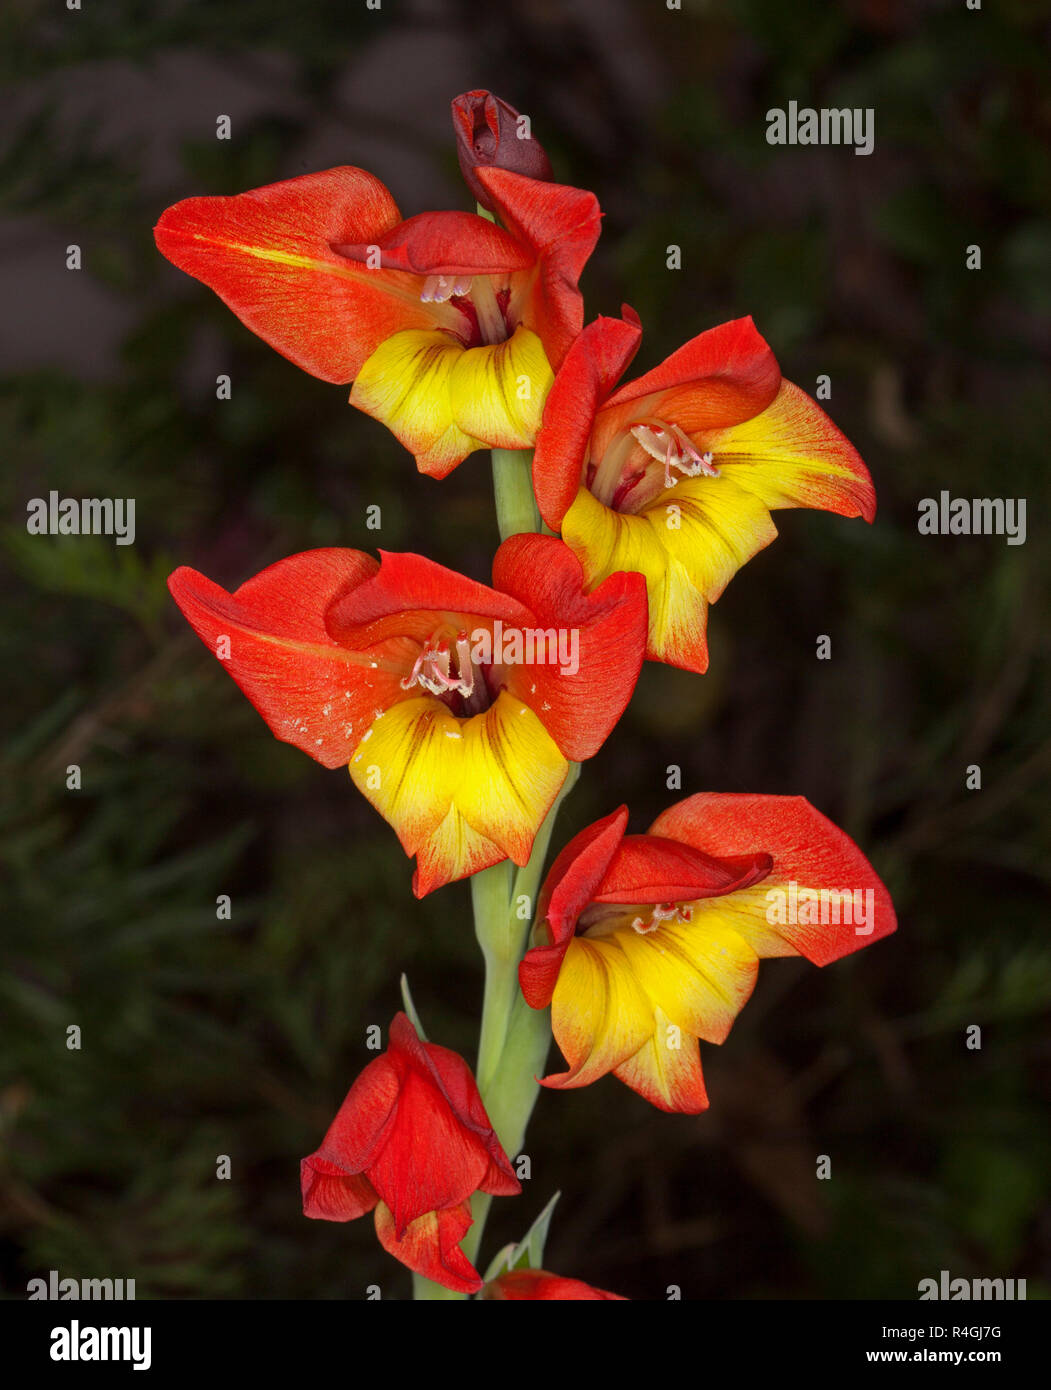 Tall green flower stem with spectacular vivid fire red and yellow flowers of gladiolus against dark background Stock Photo